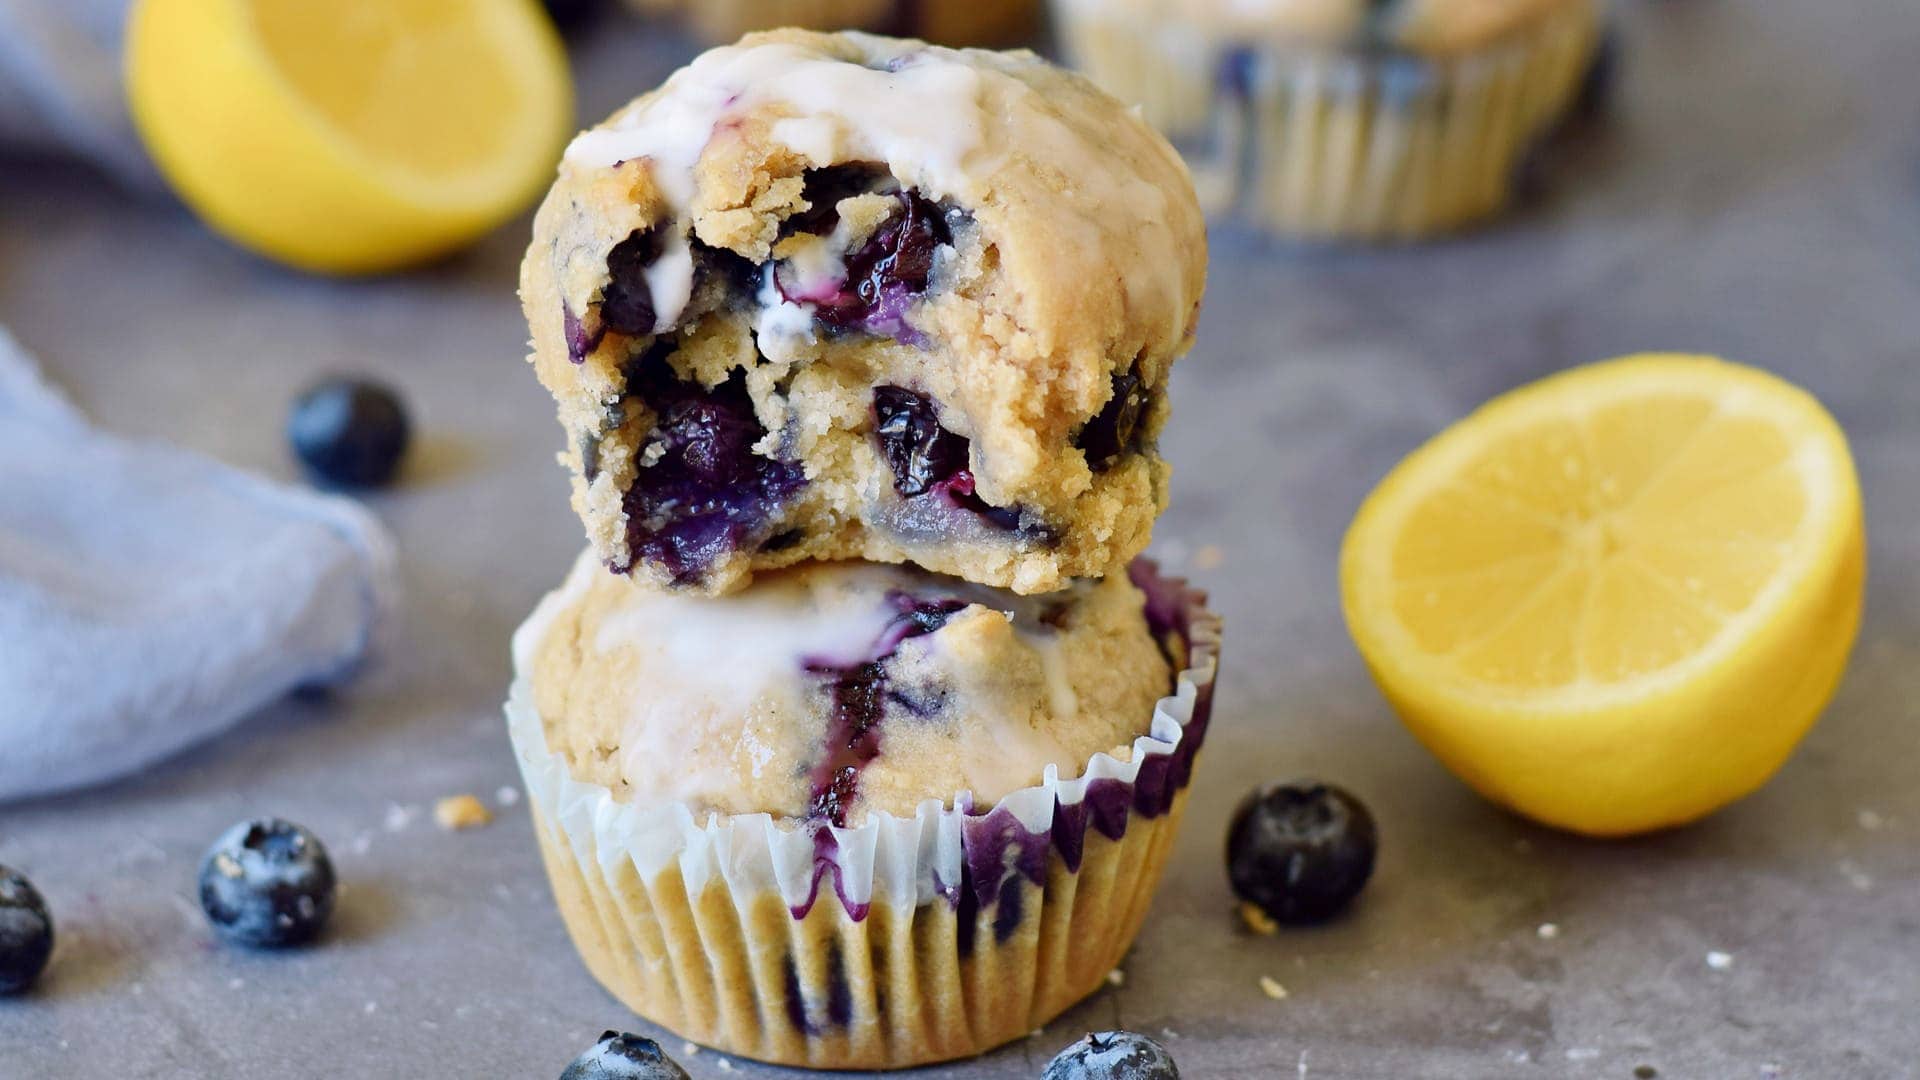 dairy-free muffin stack with lemon and blueberries